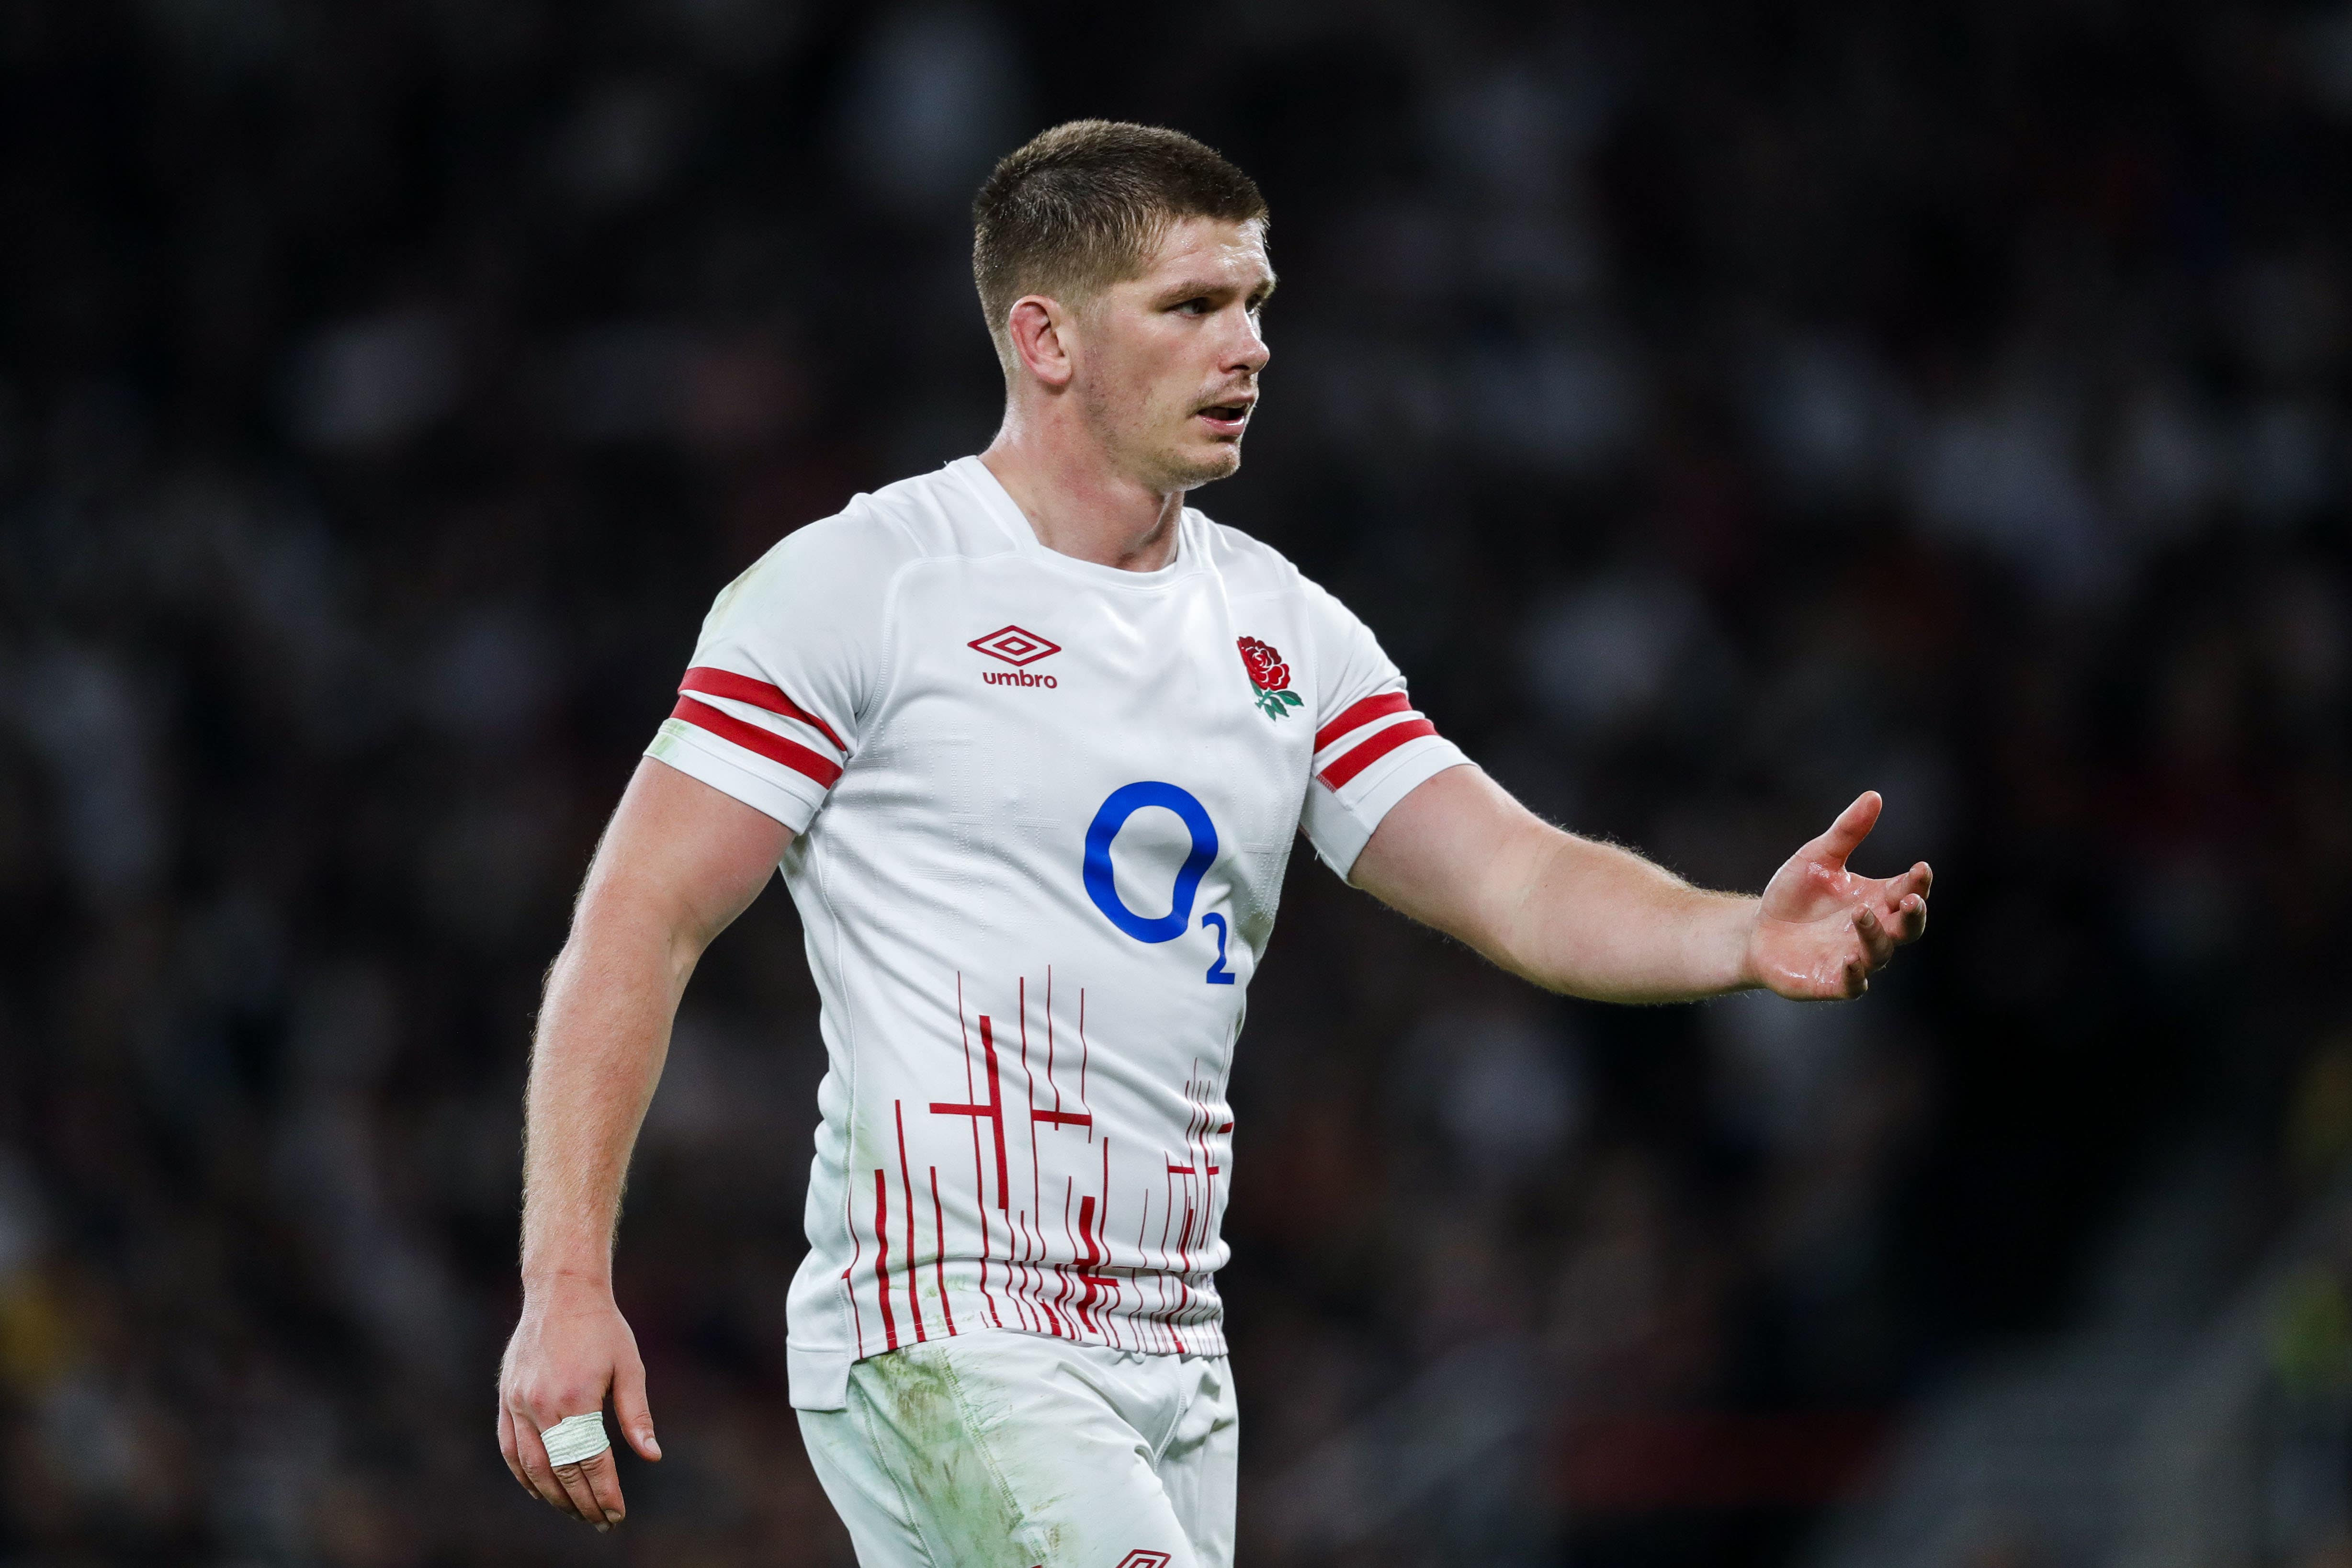 Owen Farrell is gearing up for his 100th England cap (Ben Whitley/PA).